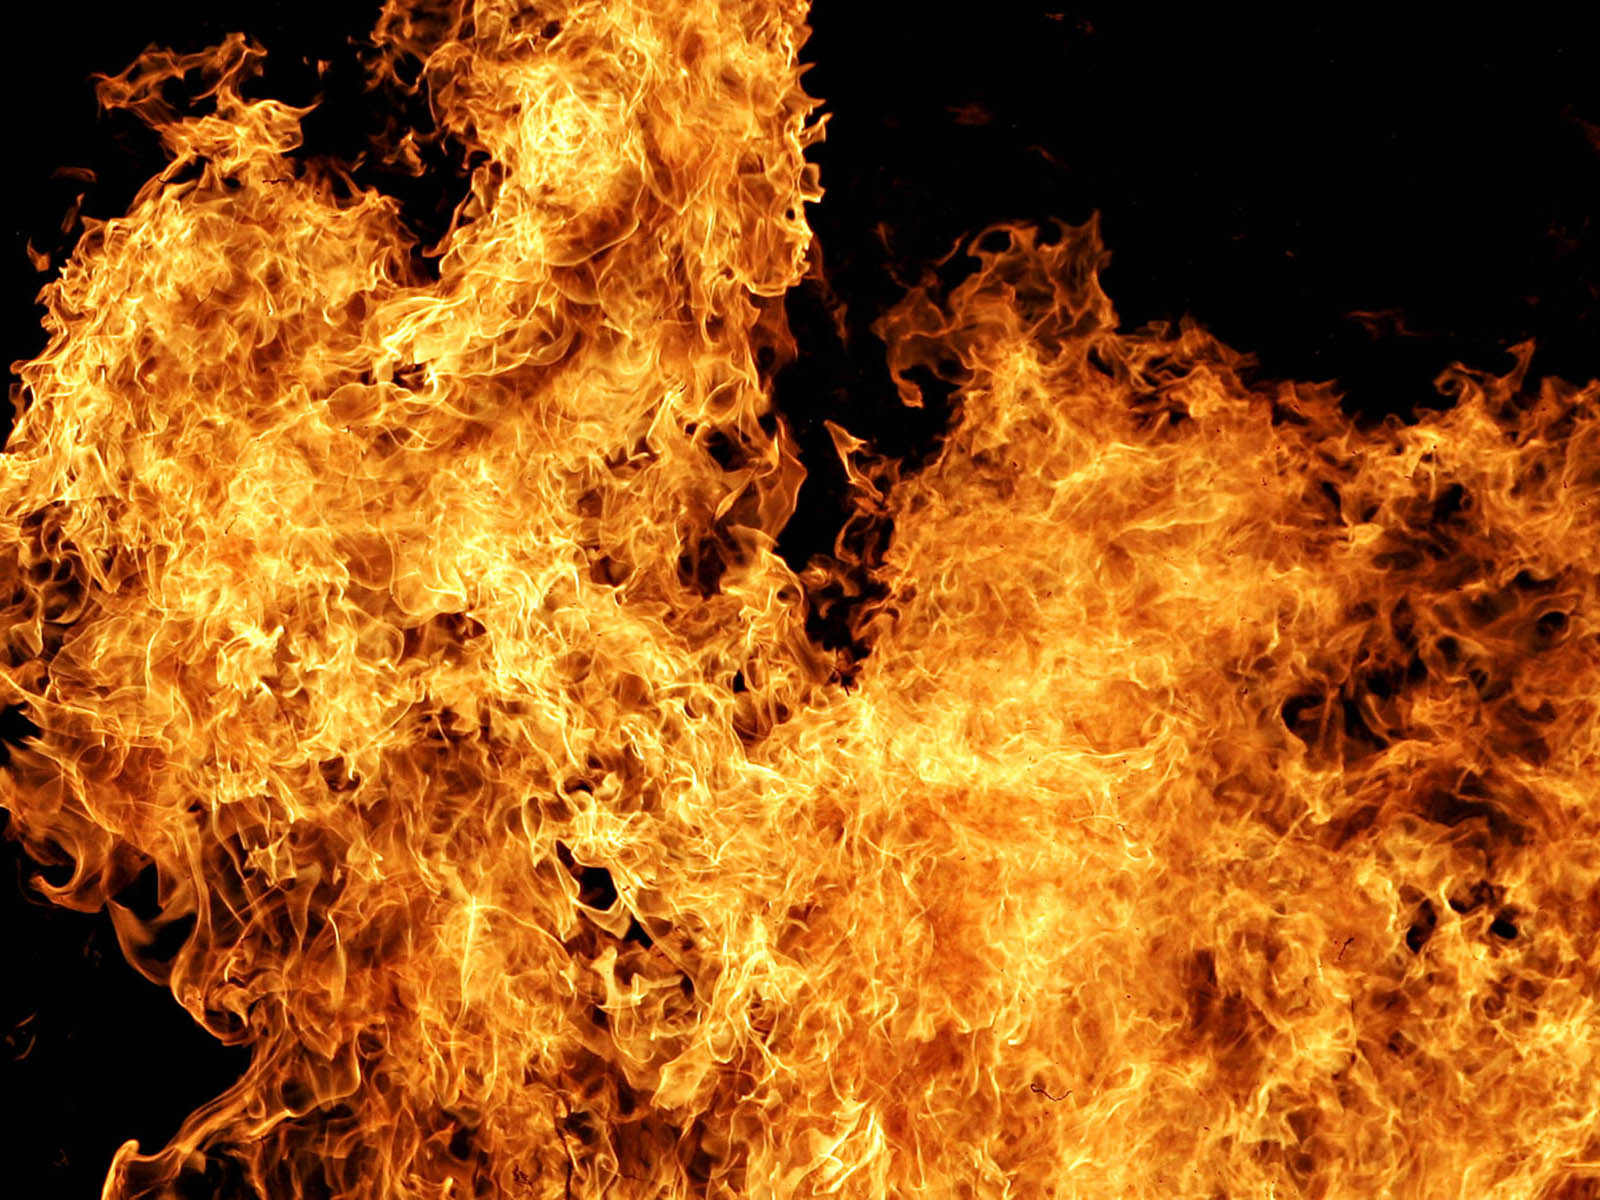  Flames Images Paos Pictures Wallpapers and Backgrounds for 1600x1200